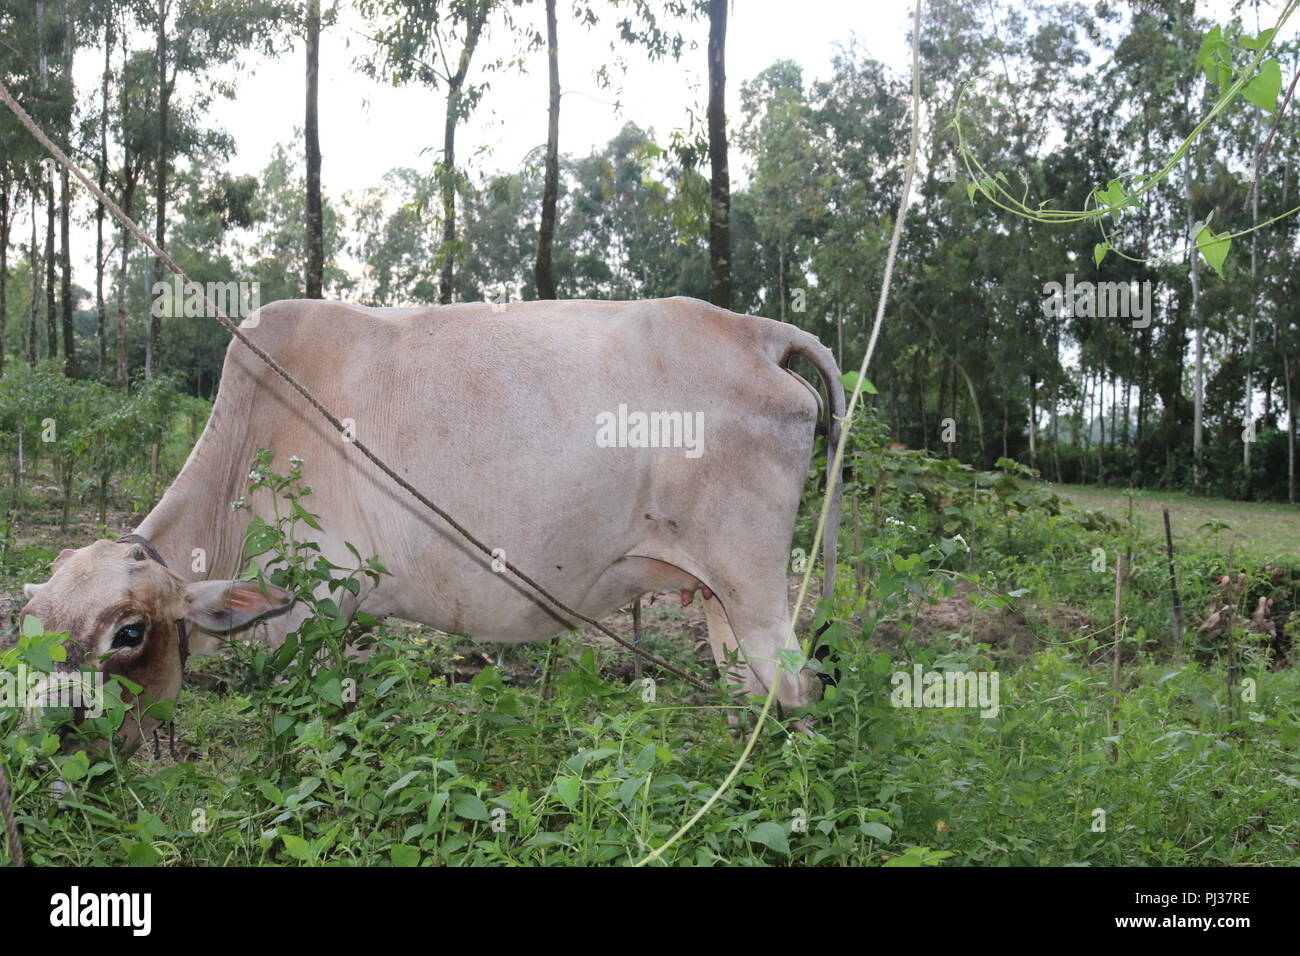 Brown and white cows in a grassy field on a bright and sunny day in The Bangladesh.Cows on a green field. Stock Photo